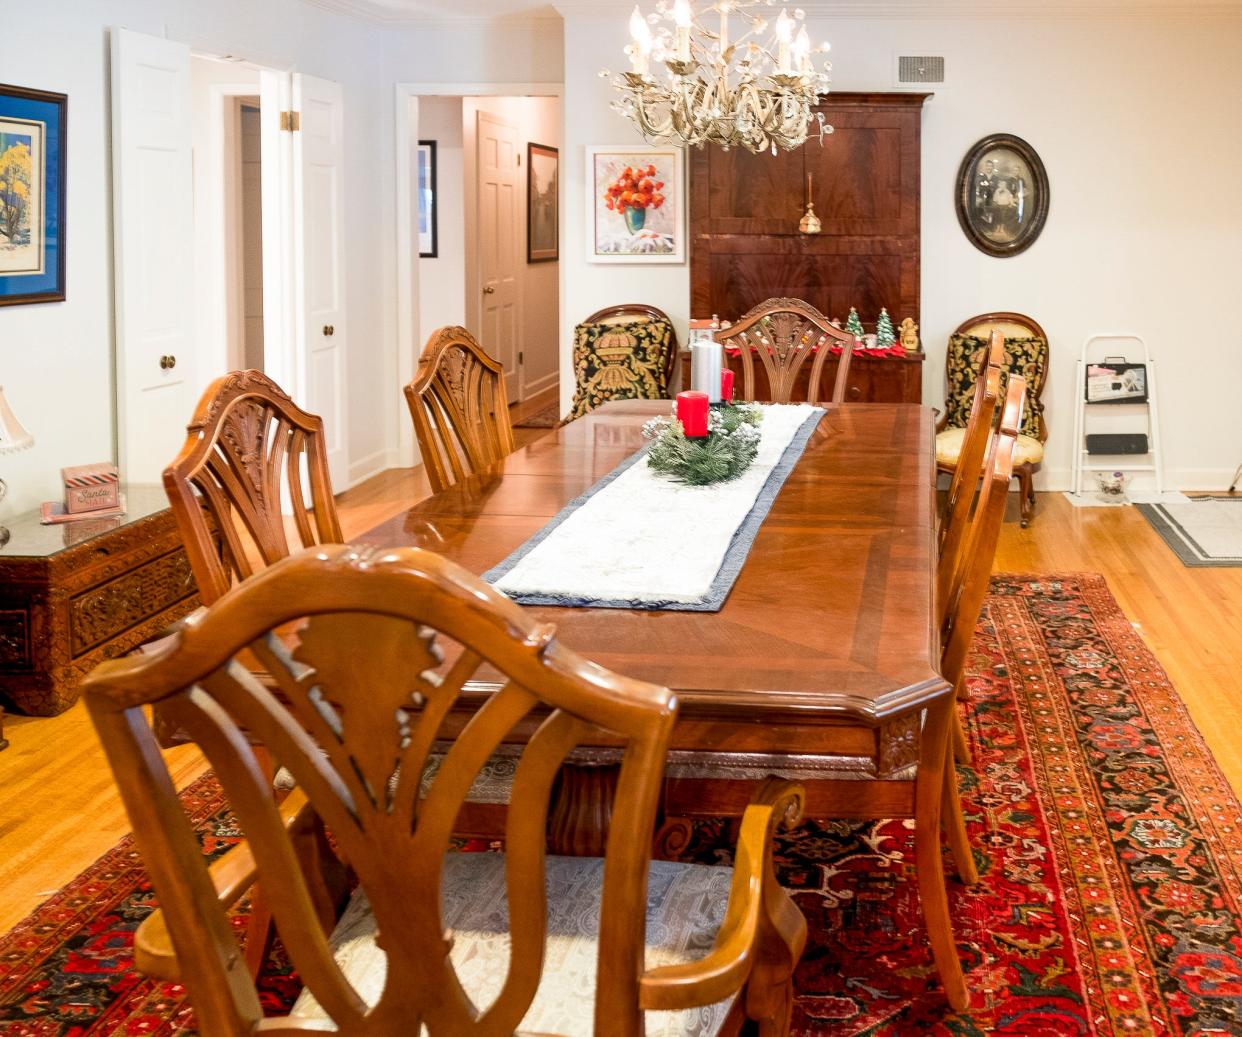 The formal dining room sits right near the home’s entrance. The room provides plenty of space for entertainment.